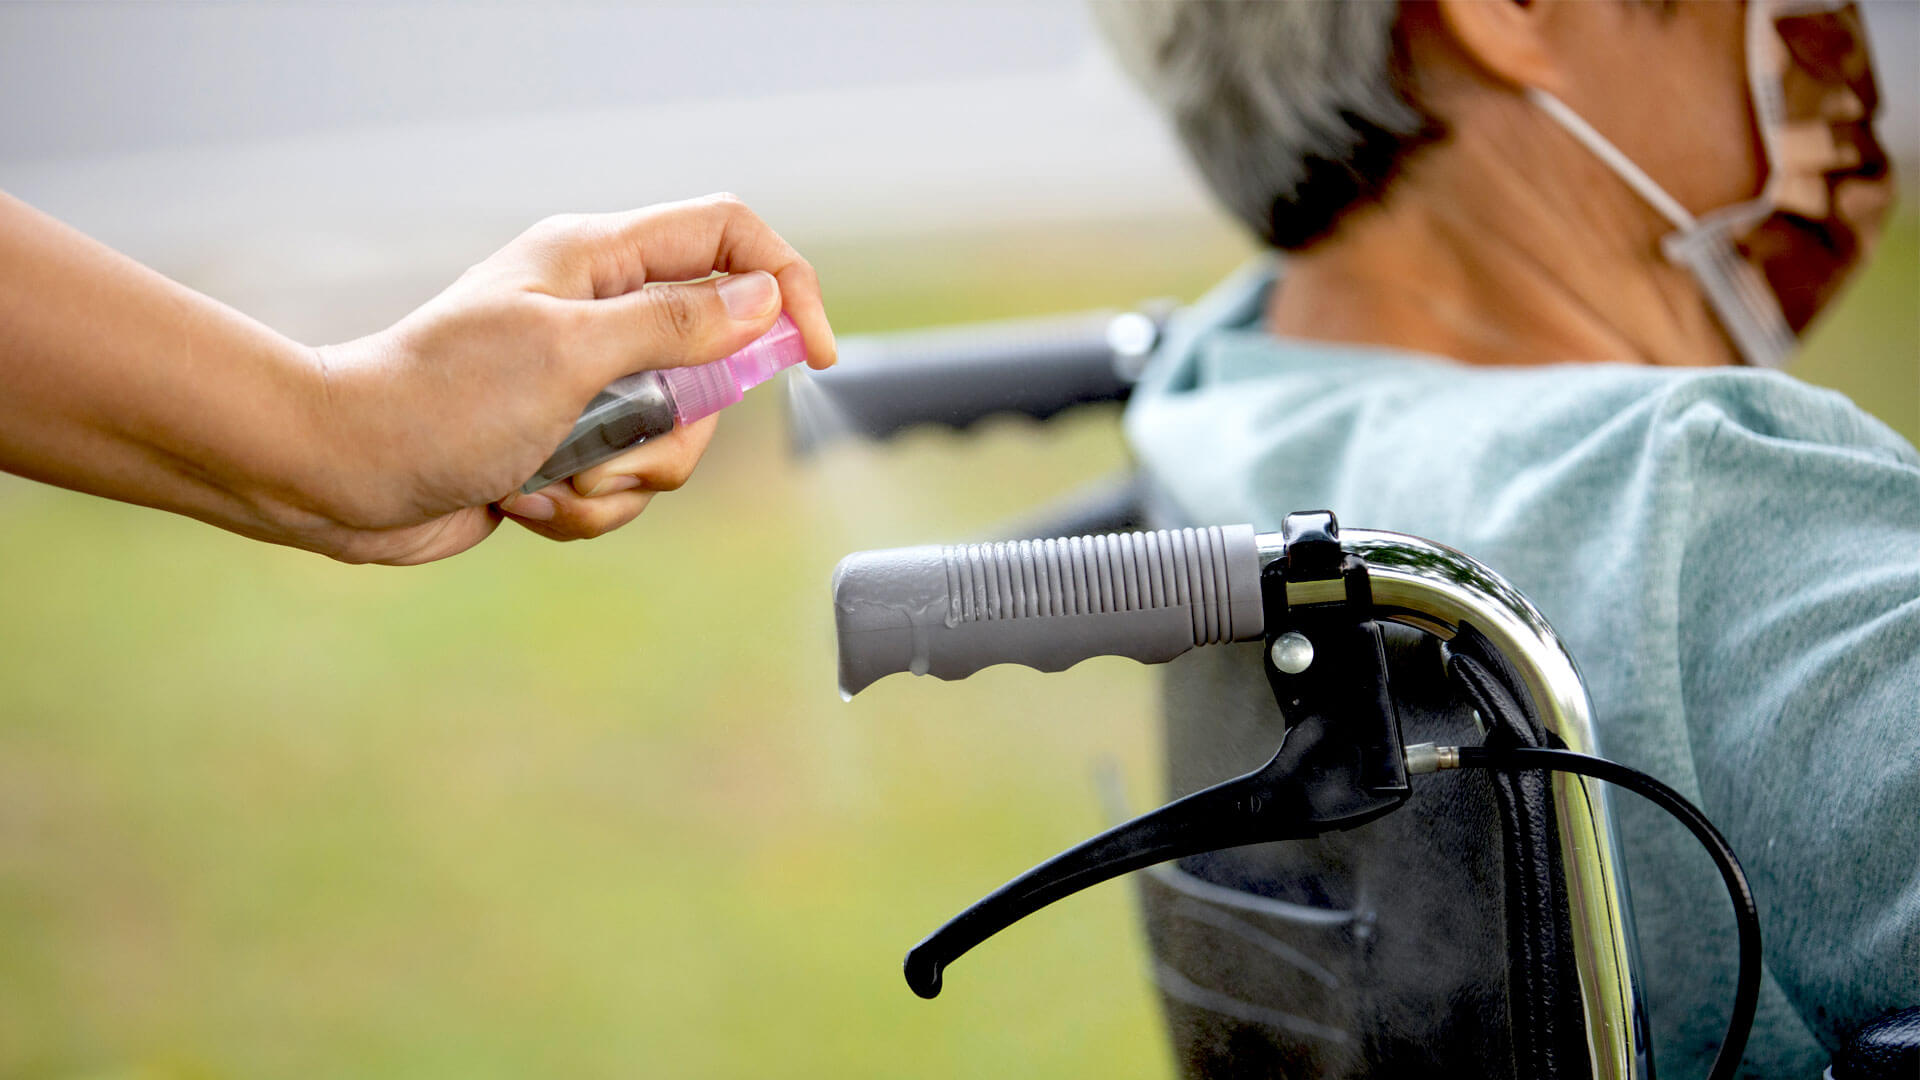 Tips for wheelchair cleaning and disinfection